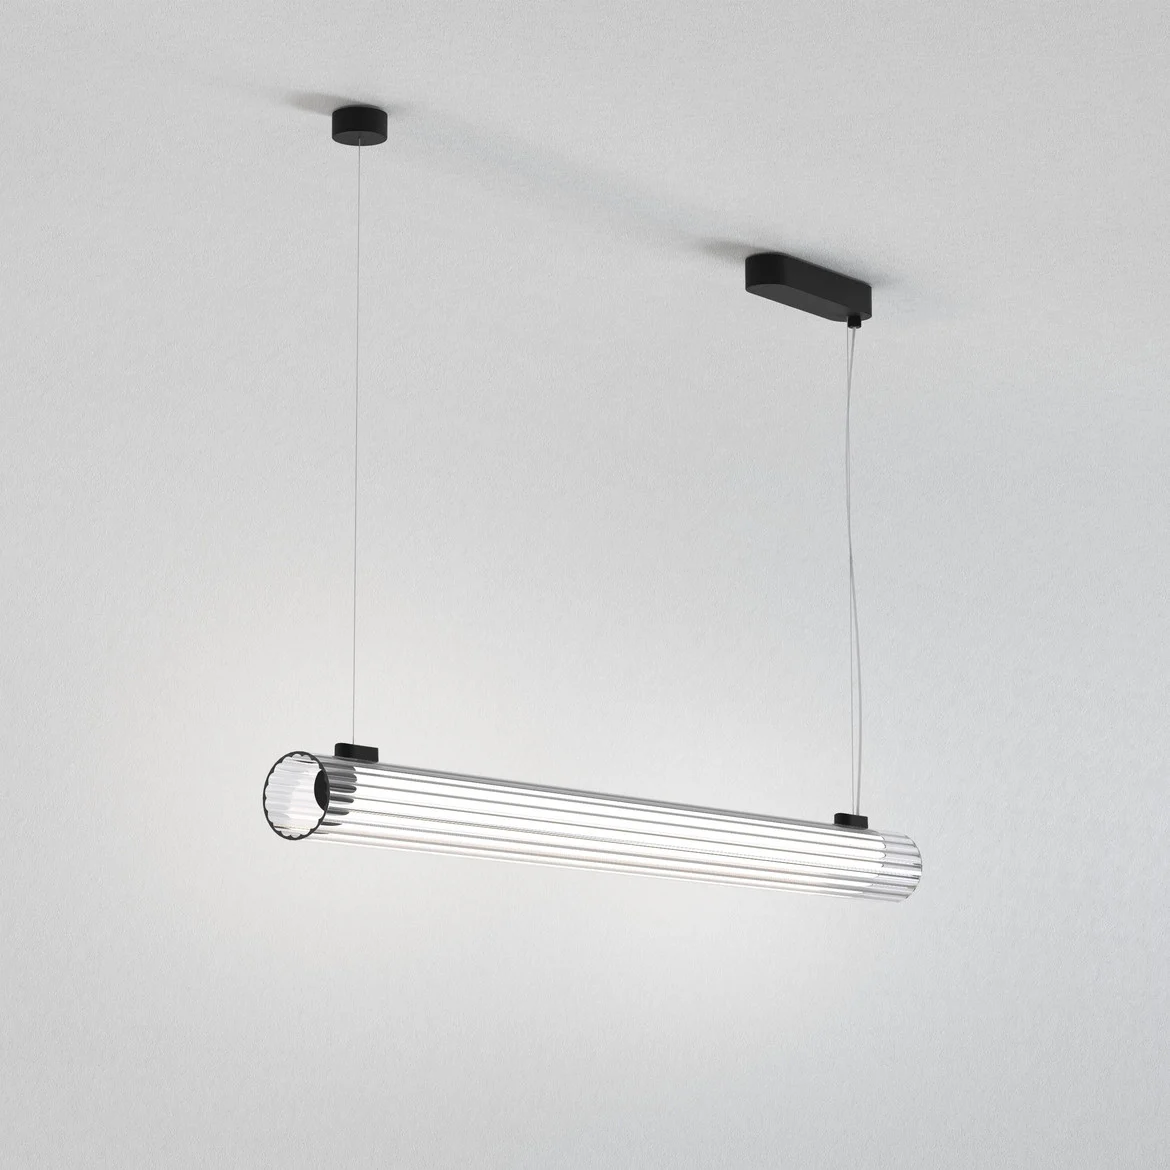 The io pendant light features a modern cylindrical design with ribbed glass and detailing in a matt black finish.